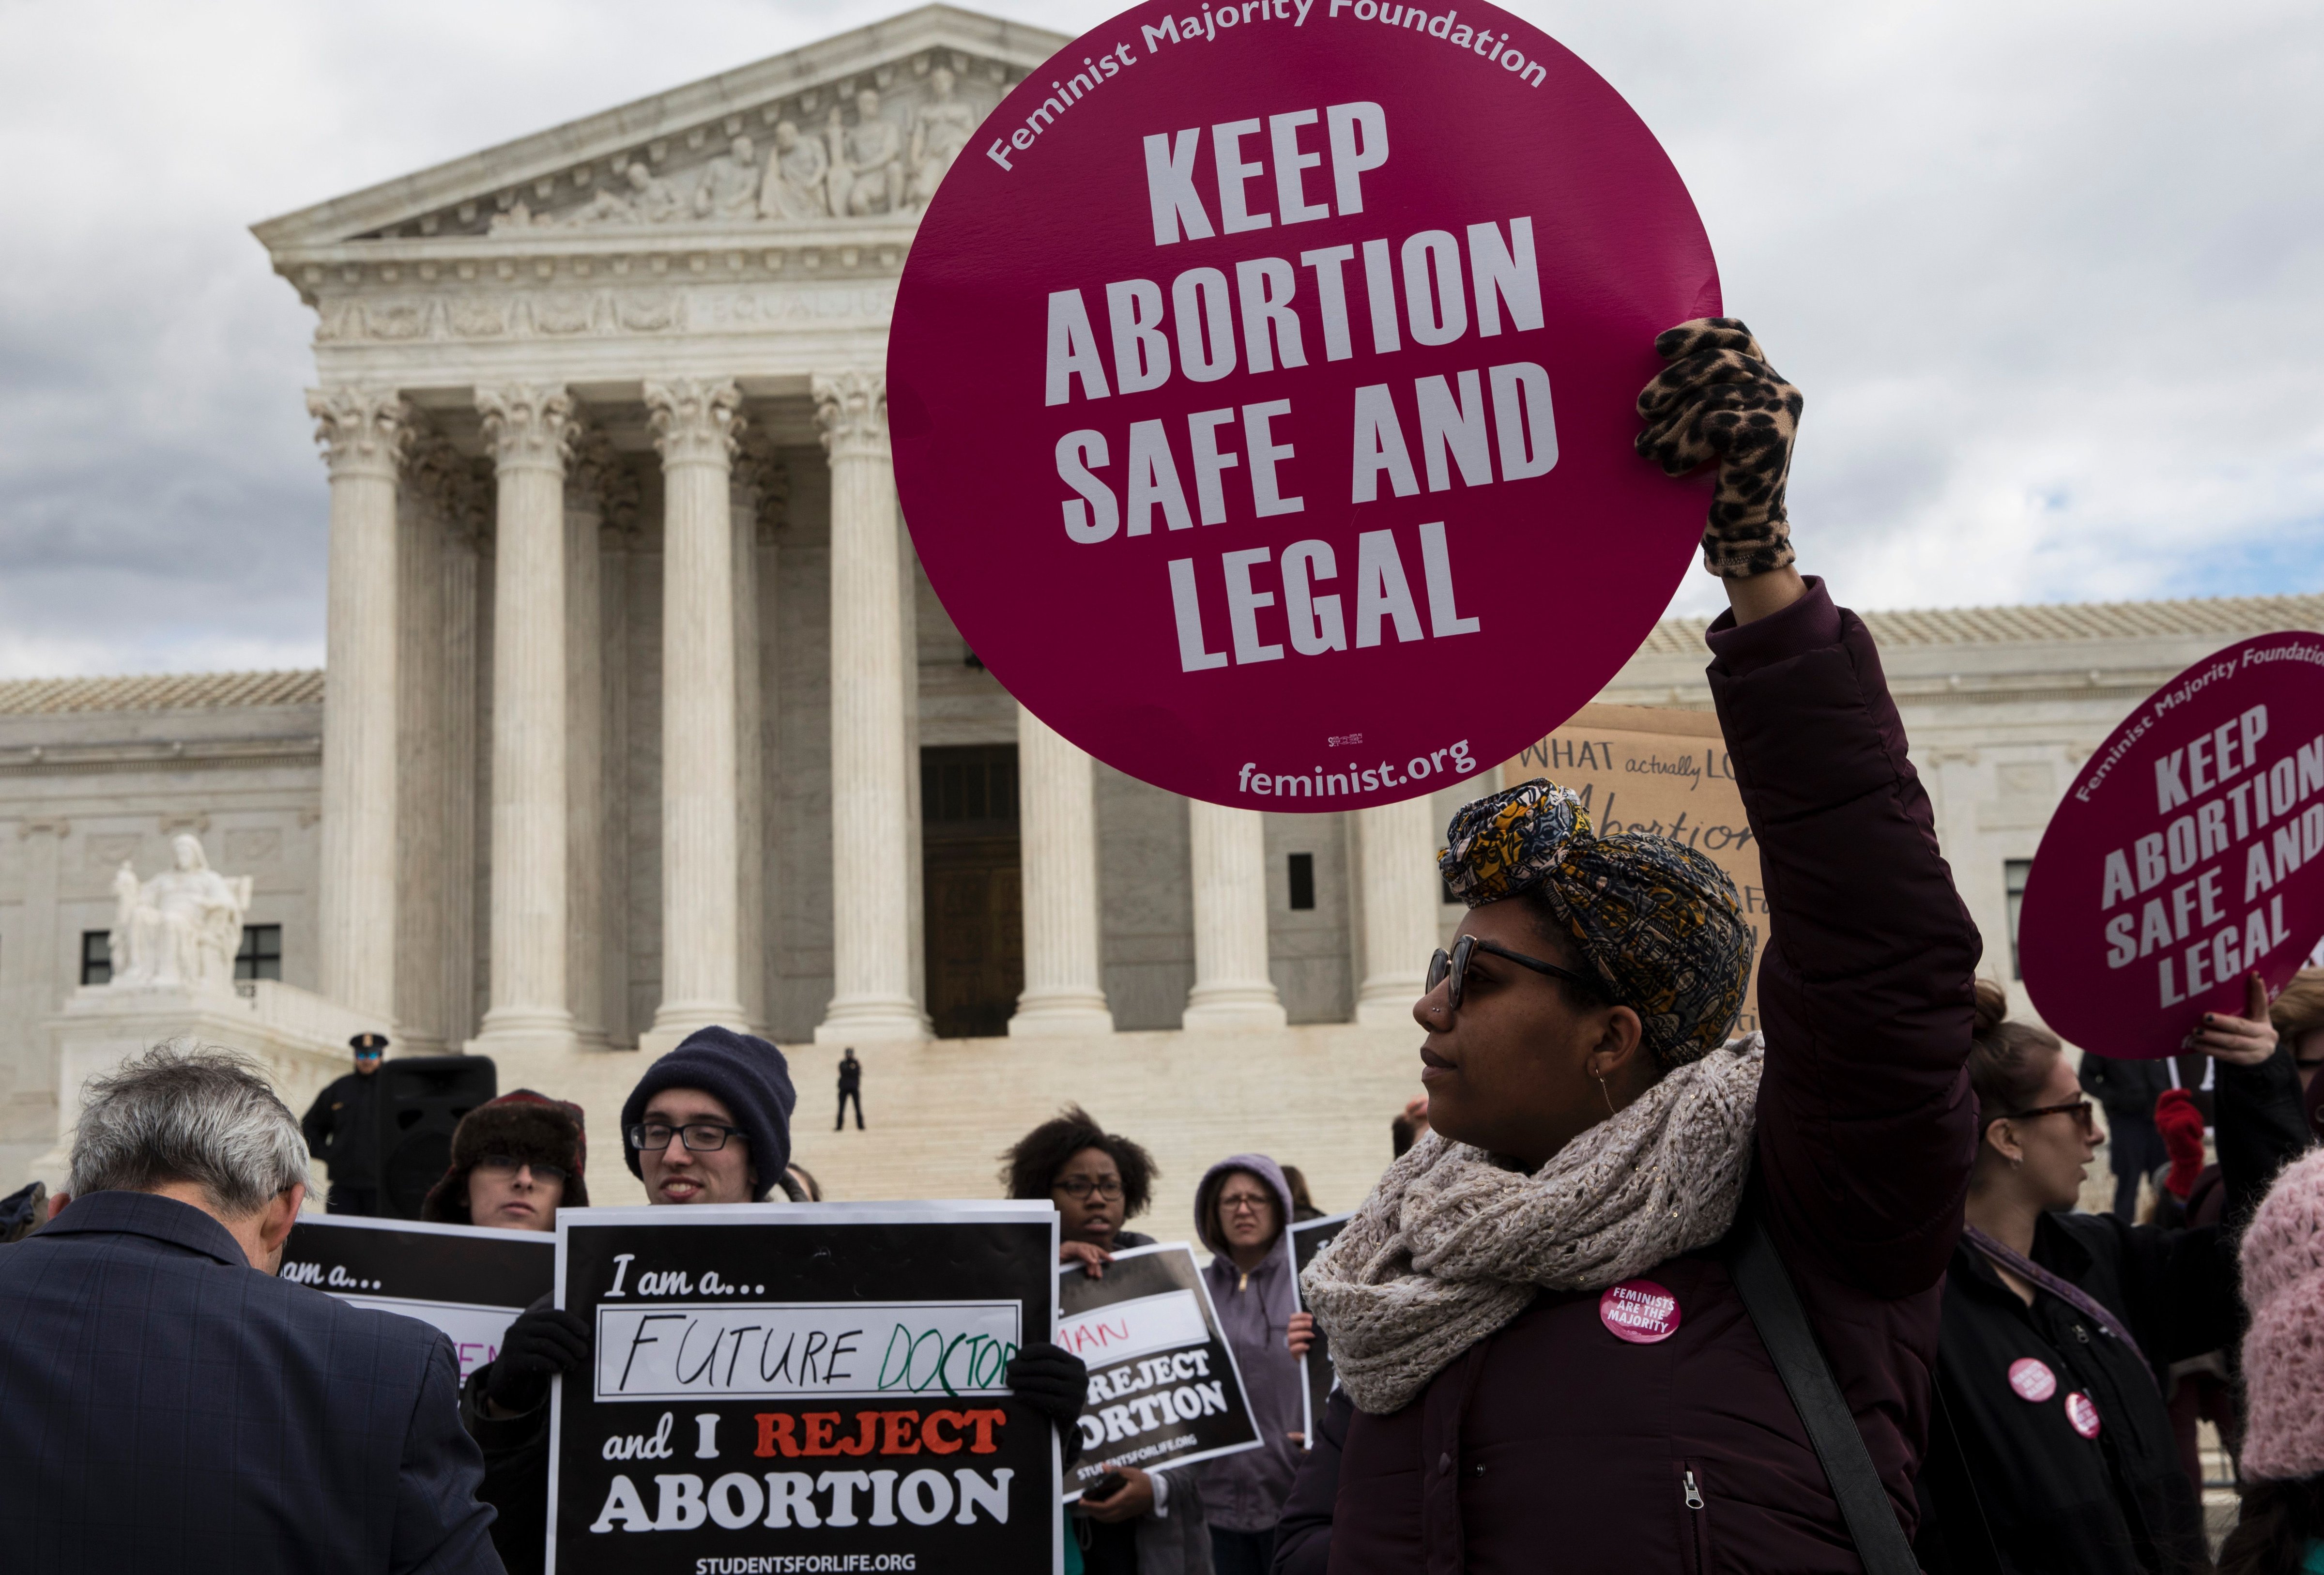 Abortion rights supporters and anti-abortion activists protest outside the U.S. Supreme Court during the 44th annual March for Life on January 27, 2017 in Washington, D.C. (Zach Gibson—AFP/Getty Images)